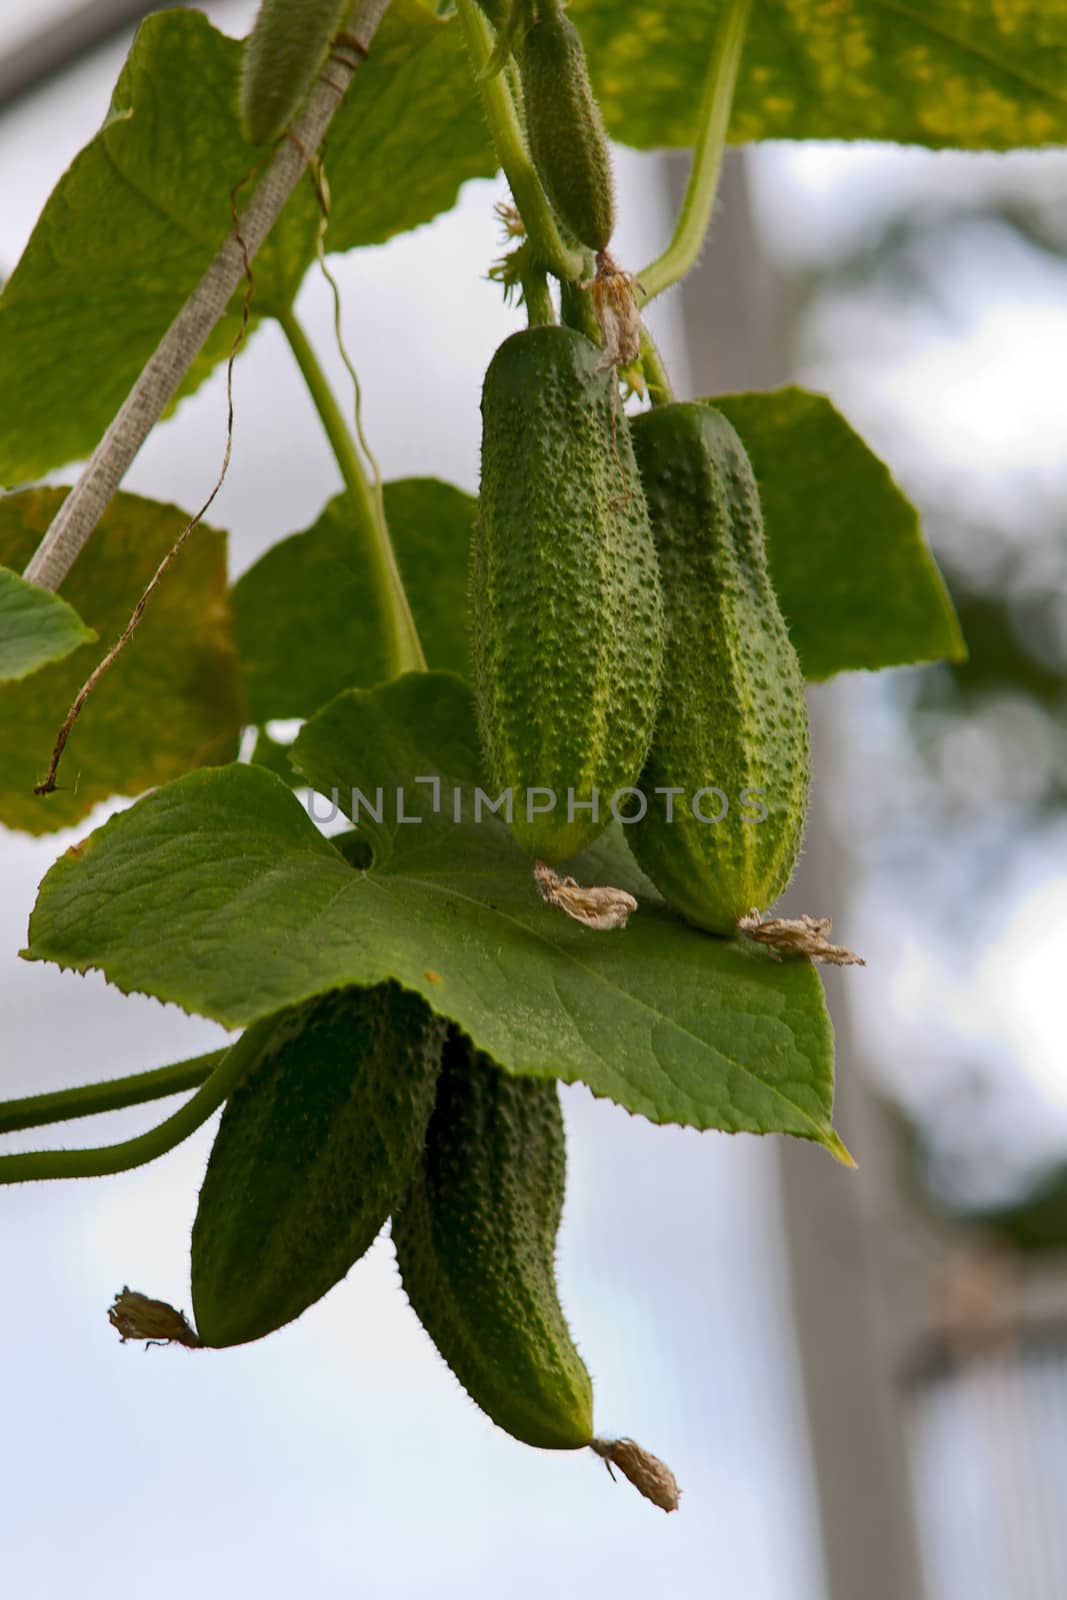 Cucumbers  close up on  branch against  background of leaves.